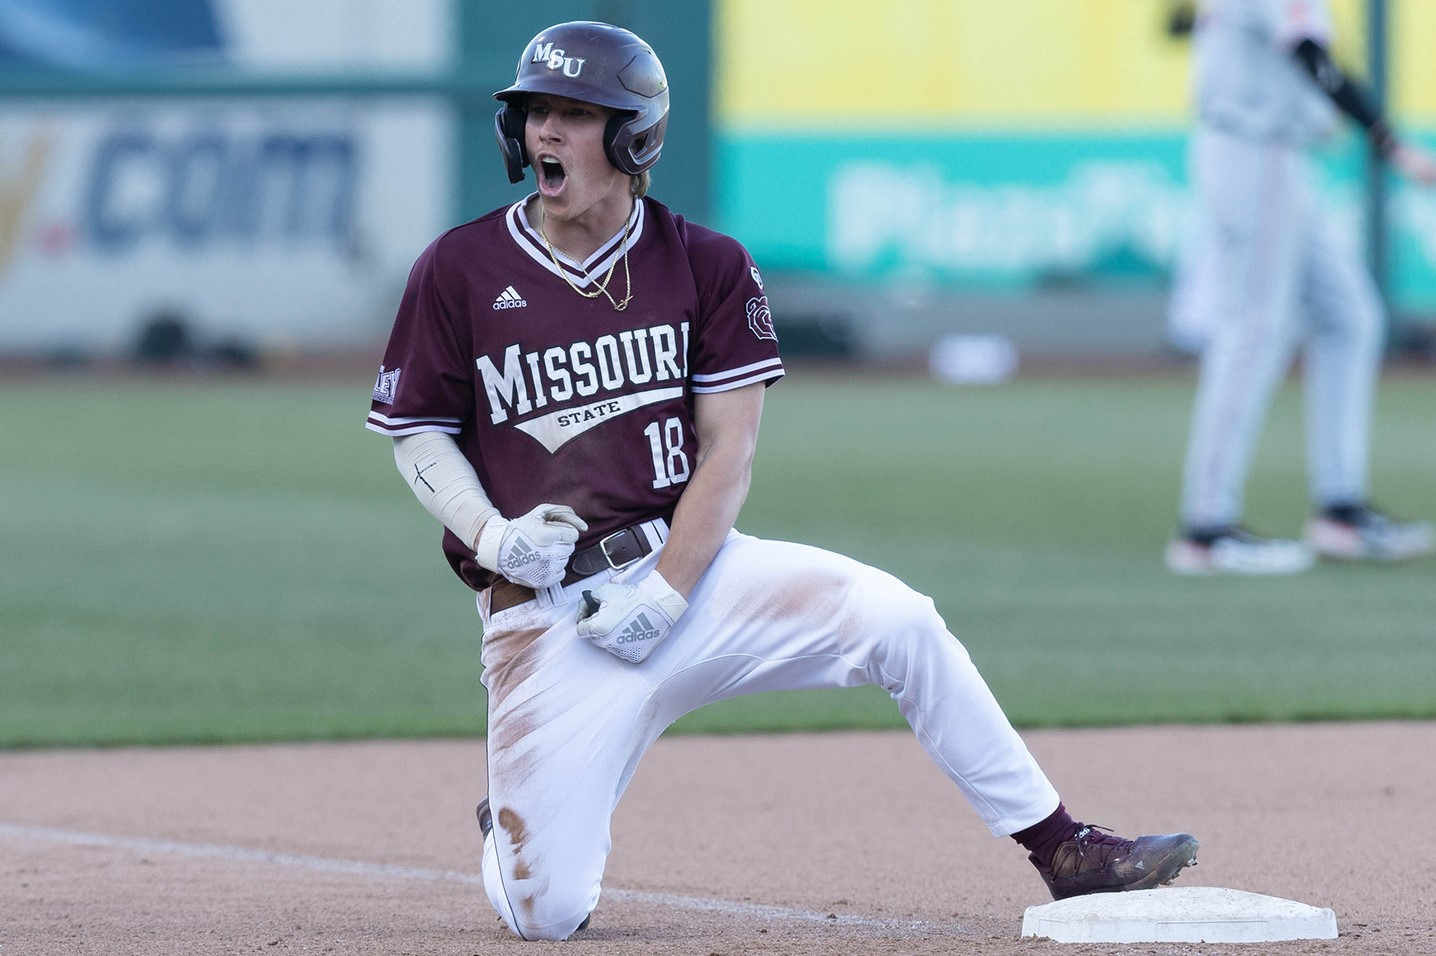 A baseball player in a Missouri State Bears uniform celebrates after hitting a triple